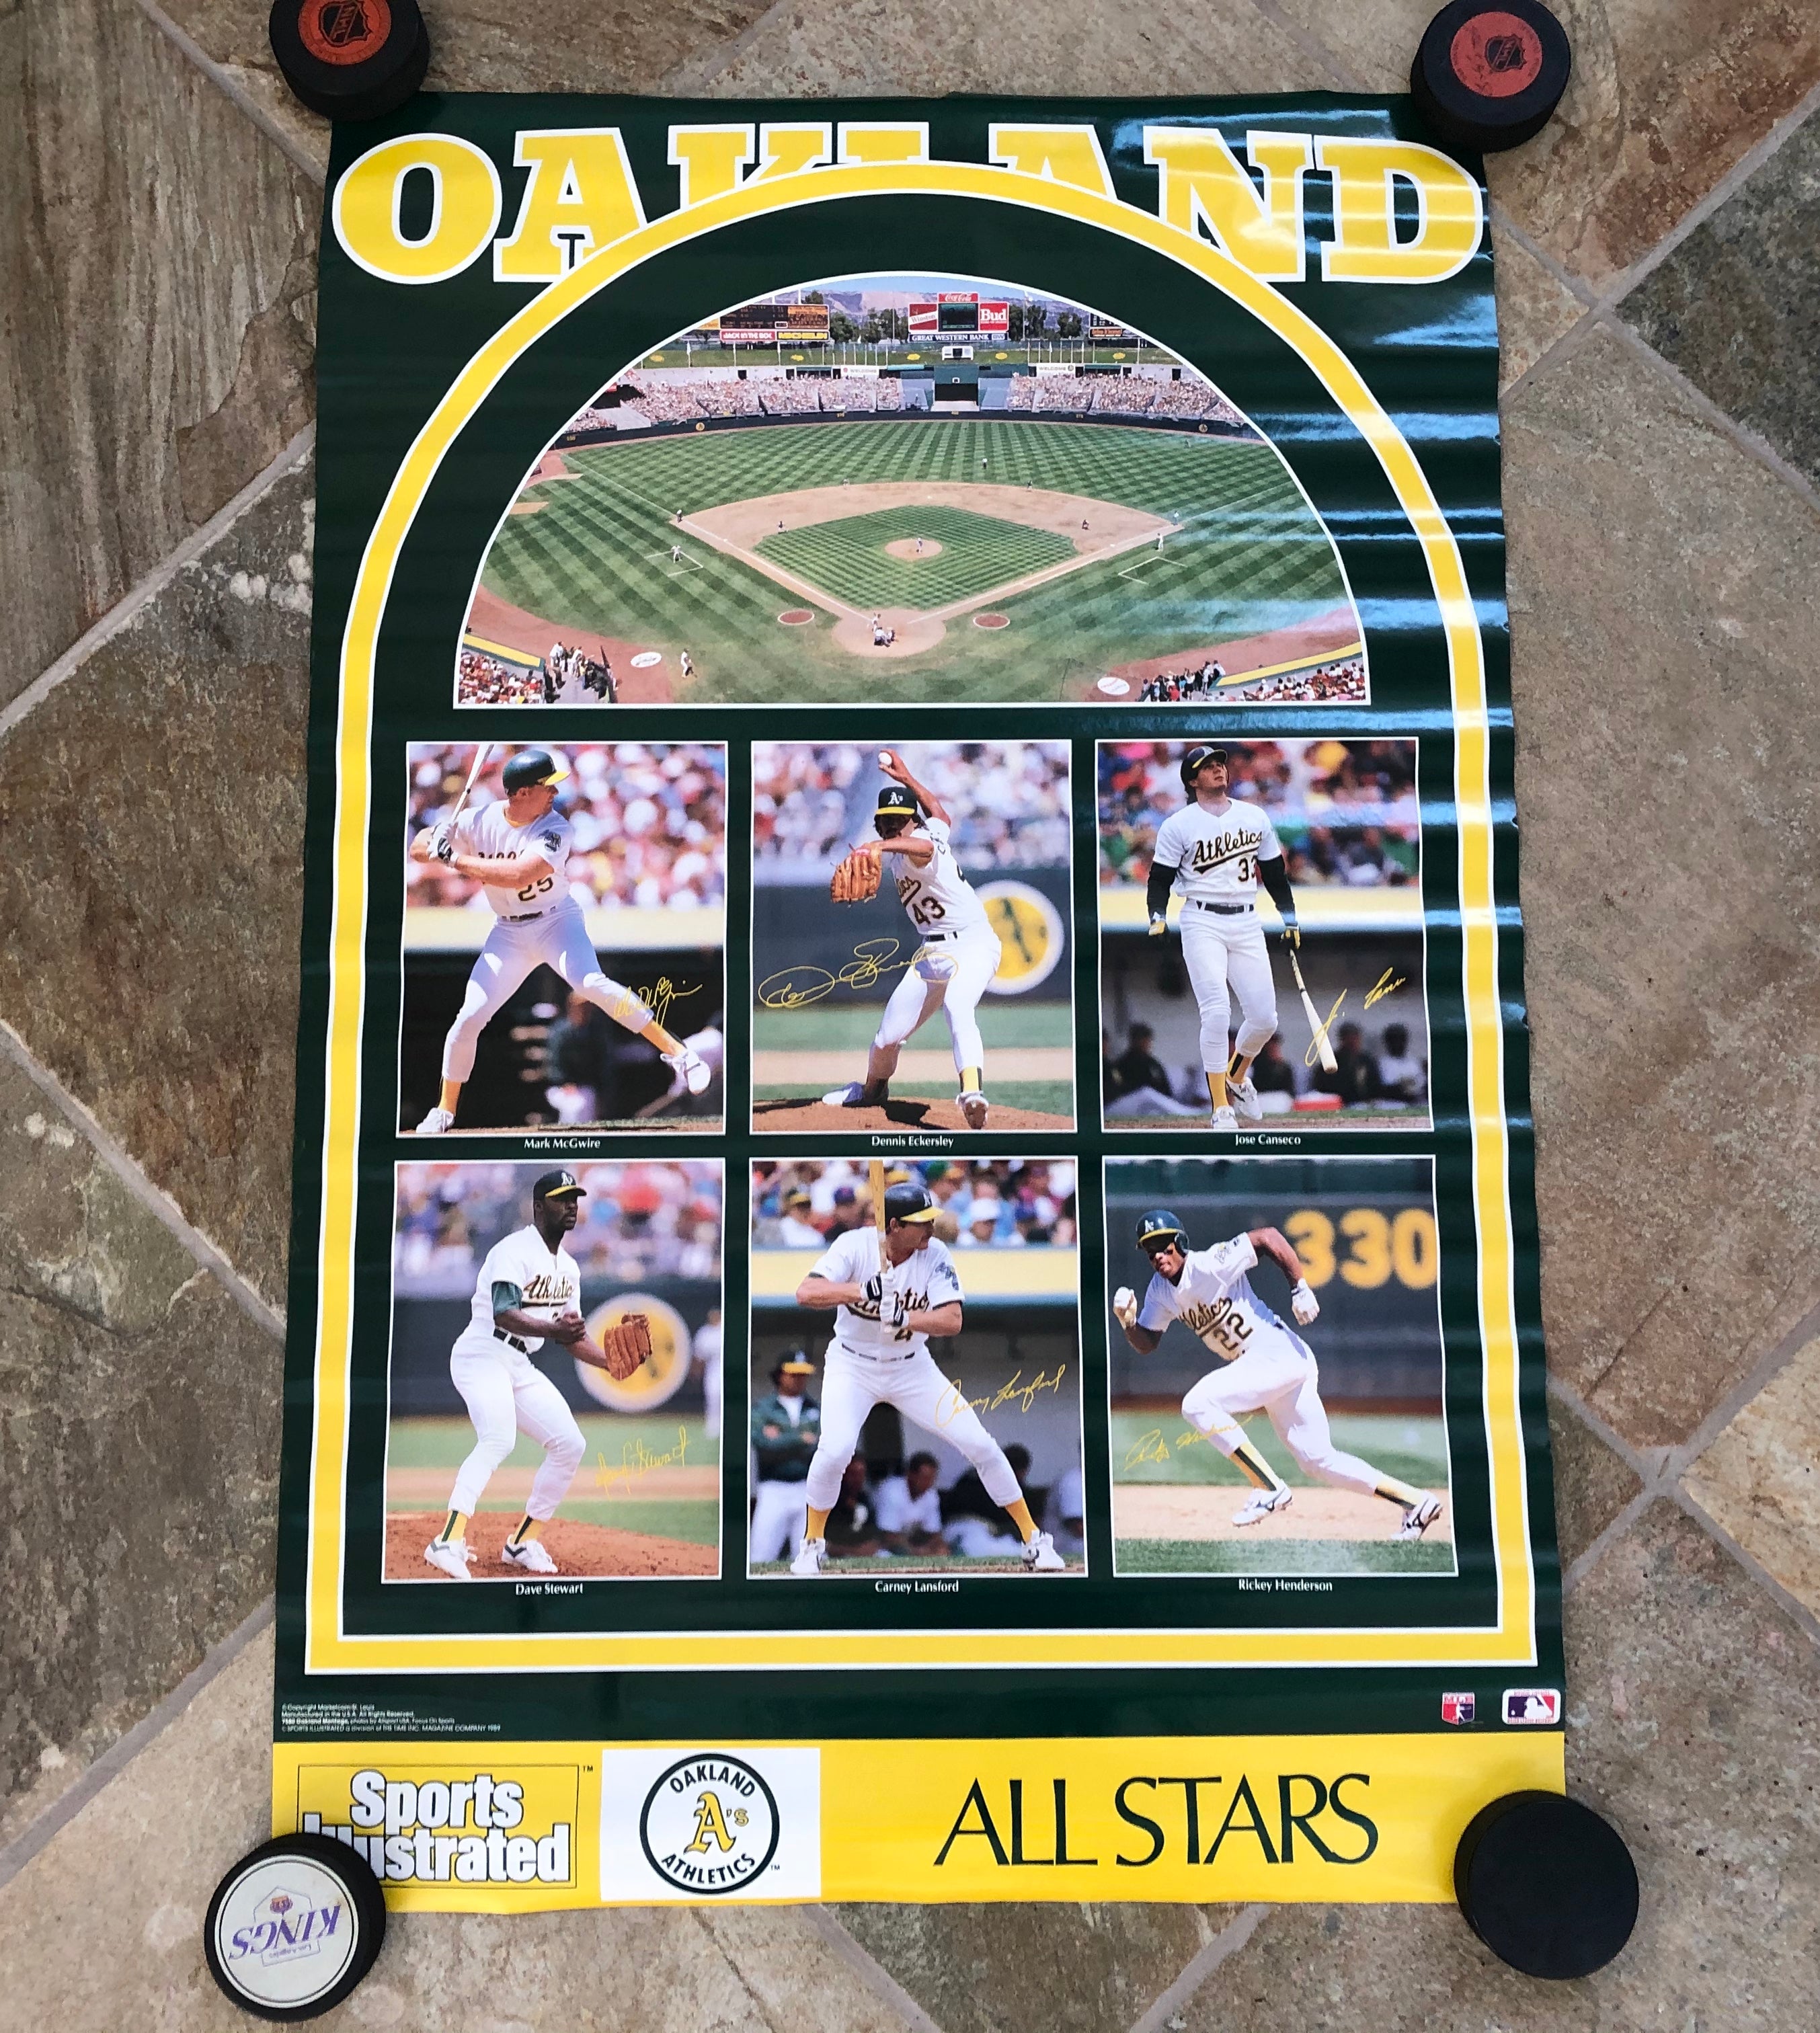 Kev Roché on X: A's poster. When I was growing up Oakland had a